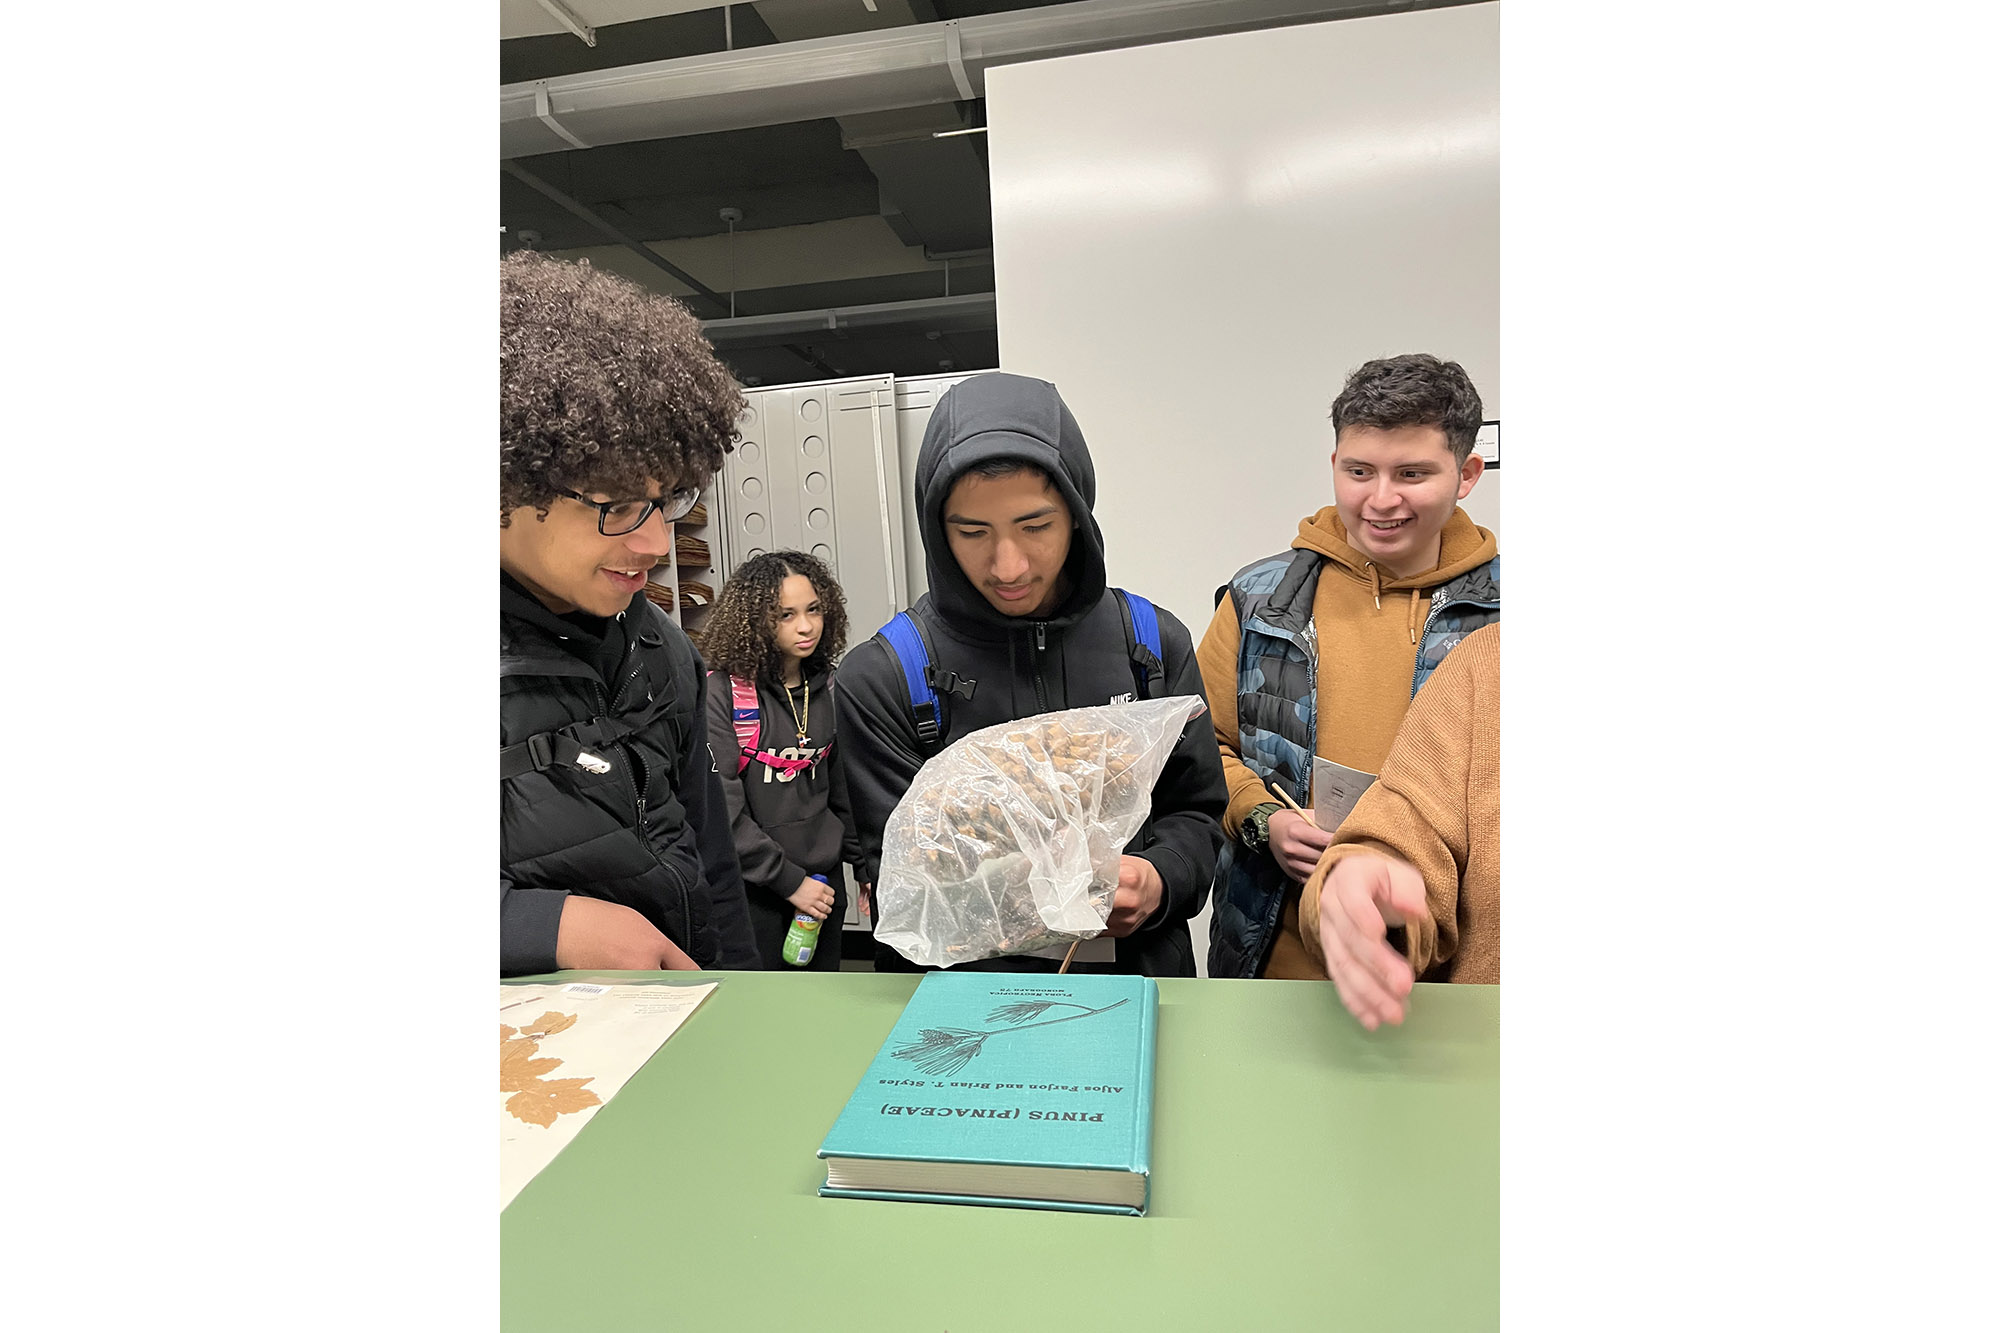 Several students gather around a table to examine herbarium specimens